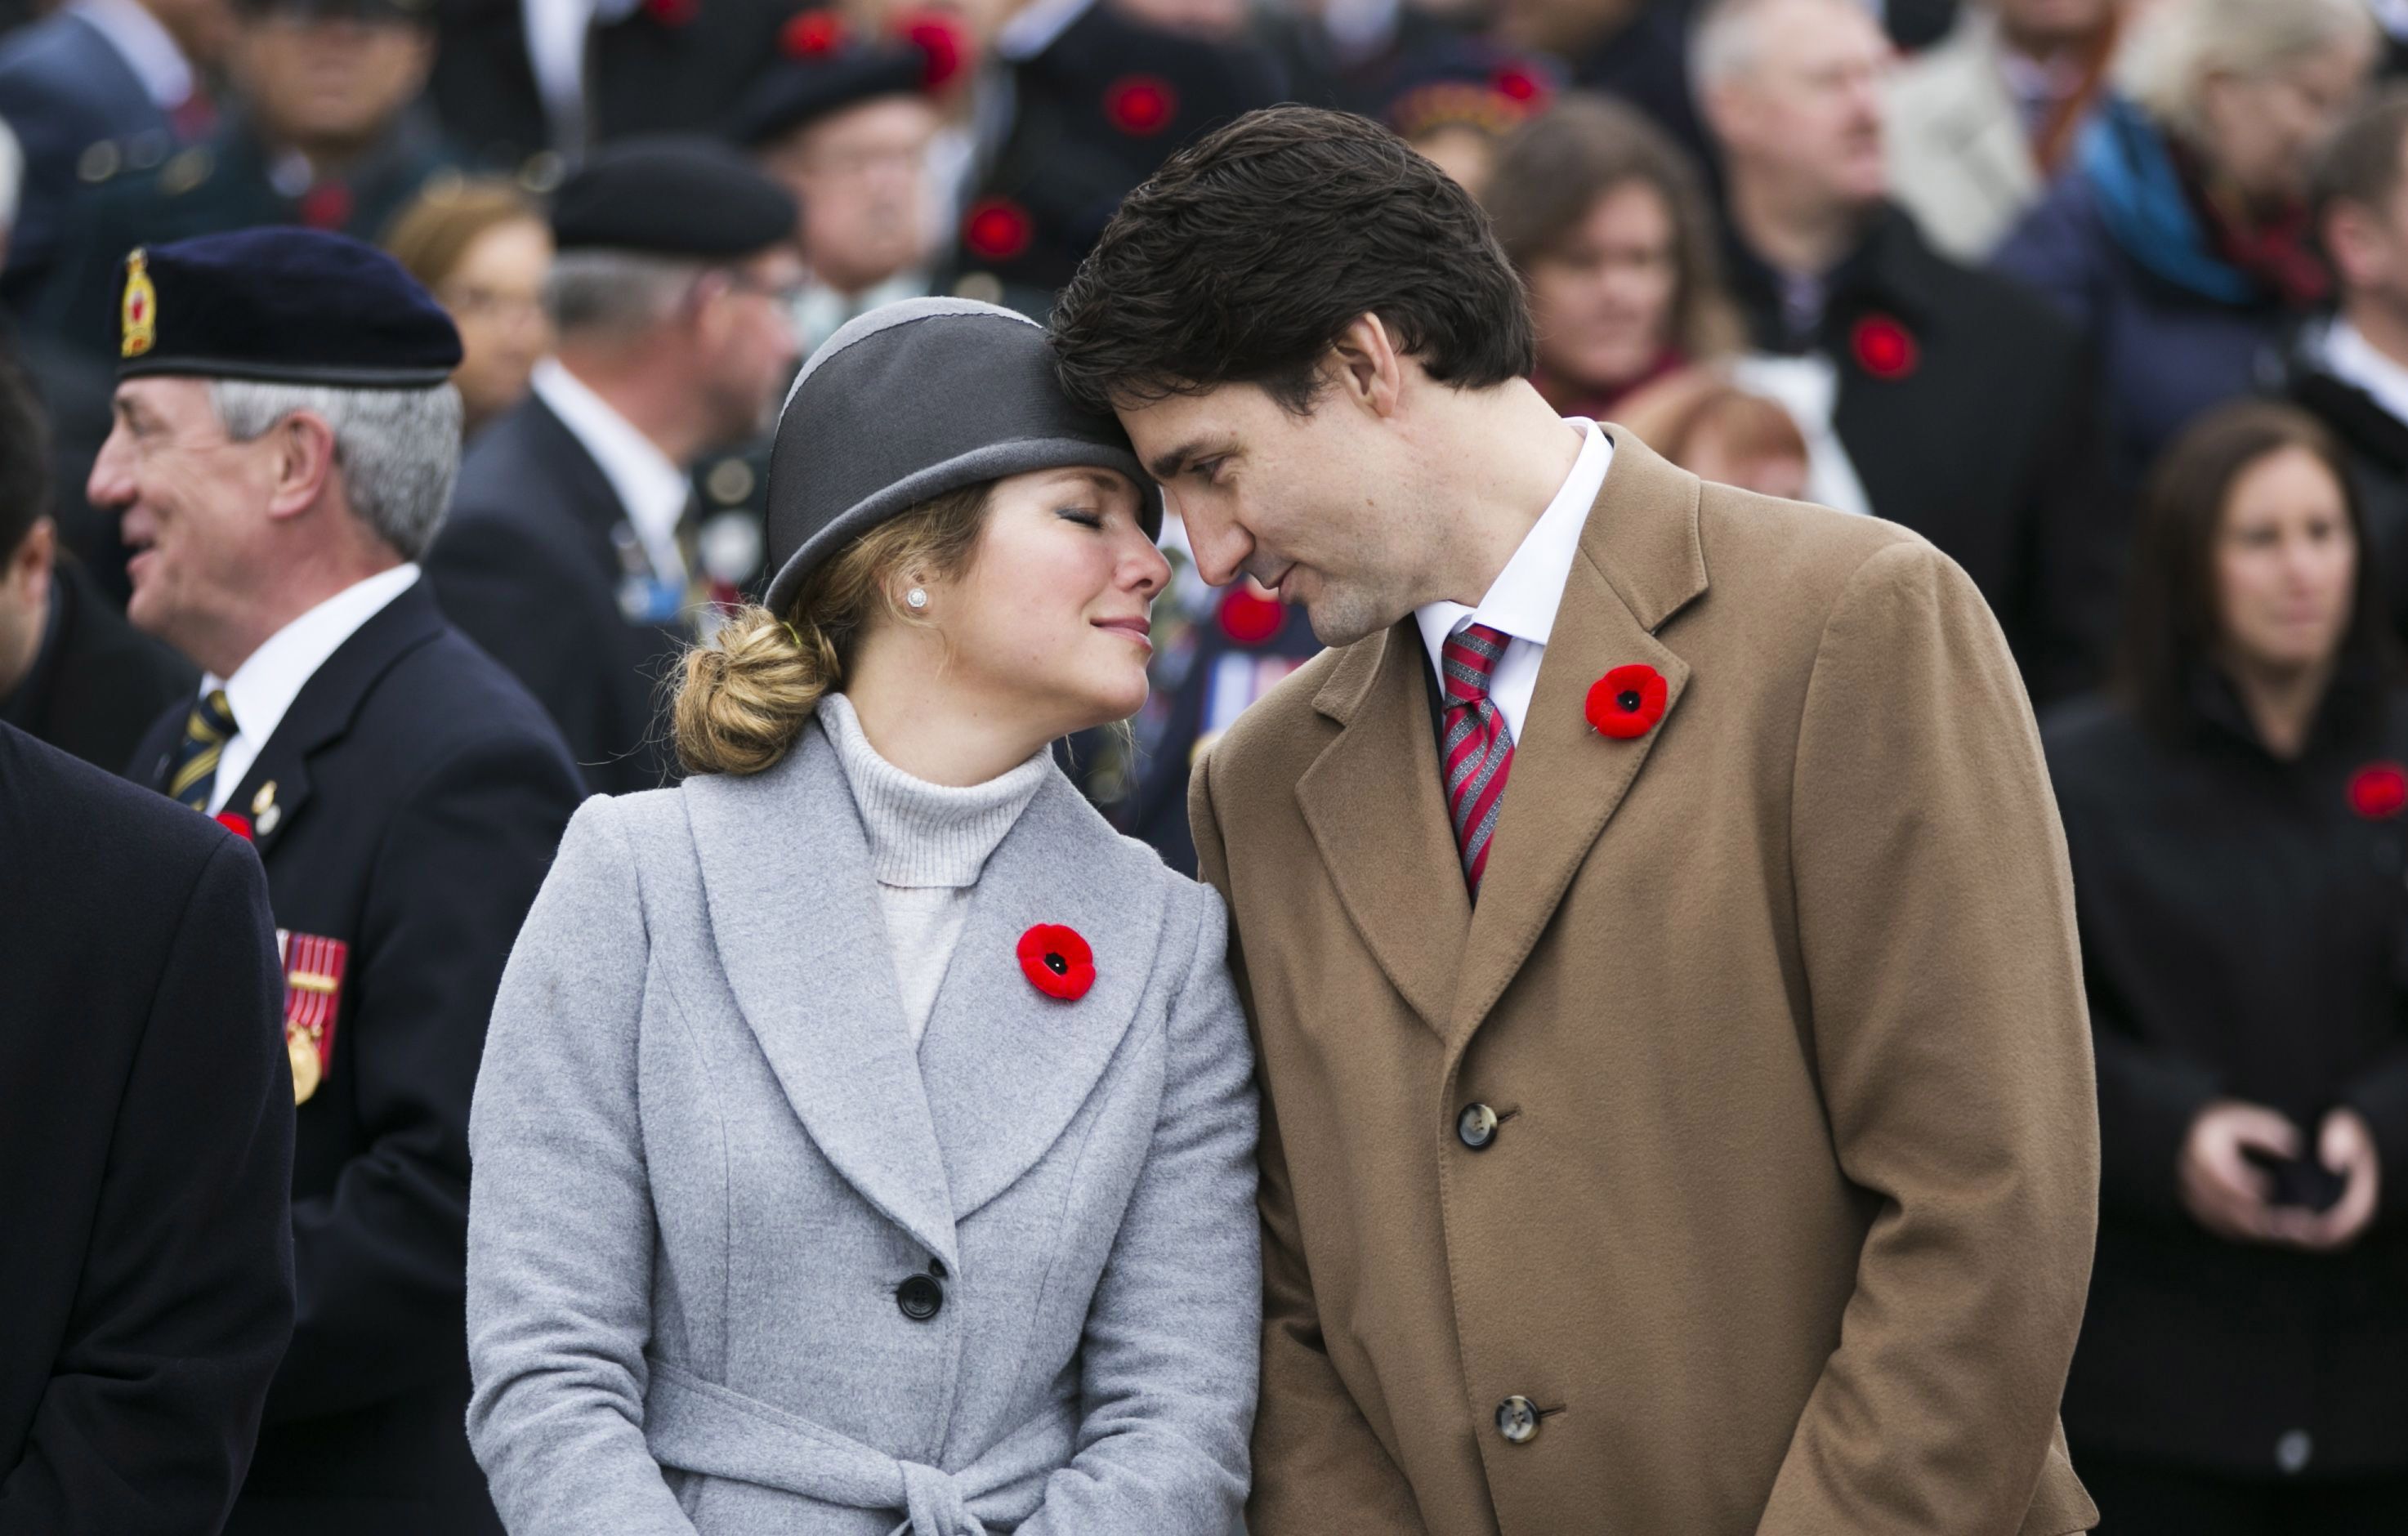 Cute Justin Trudeau and Sophie Gregoire Photo Is Justin Trudeau's Wife